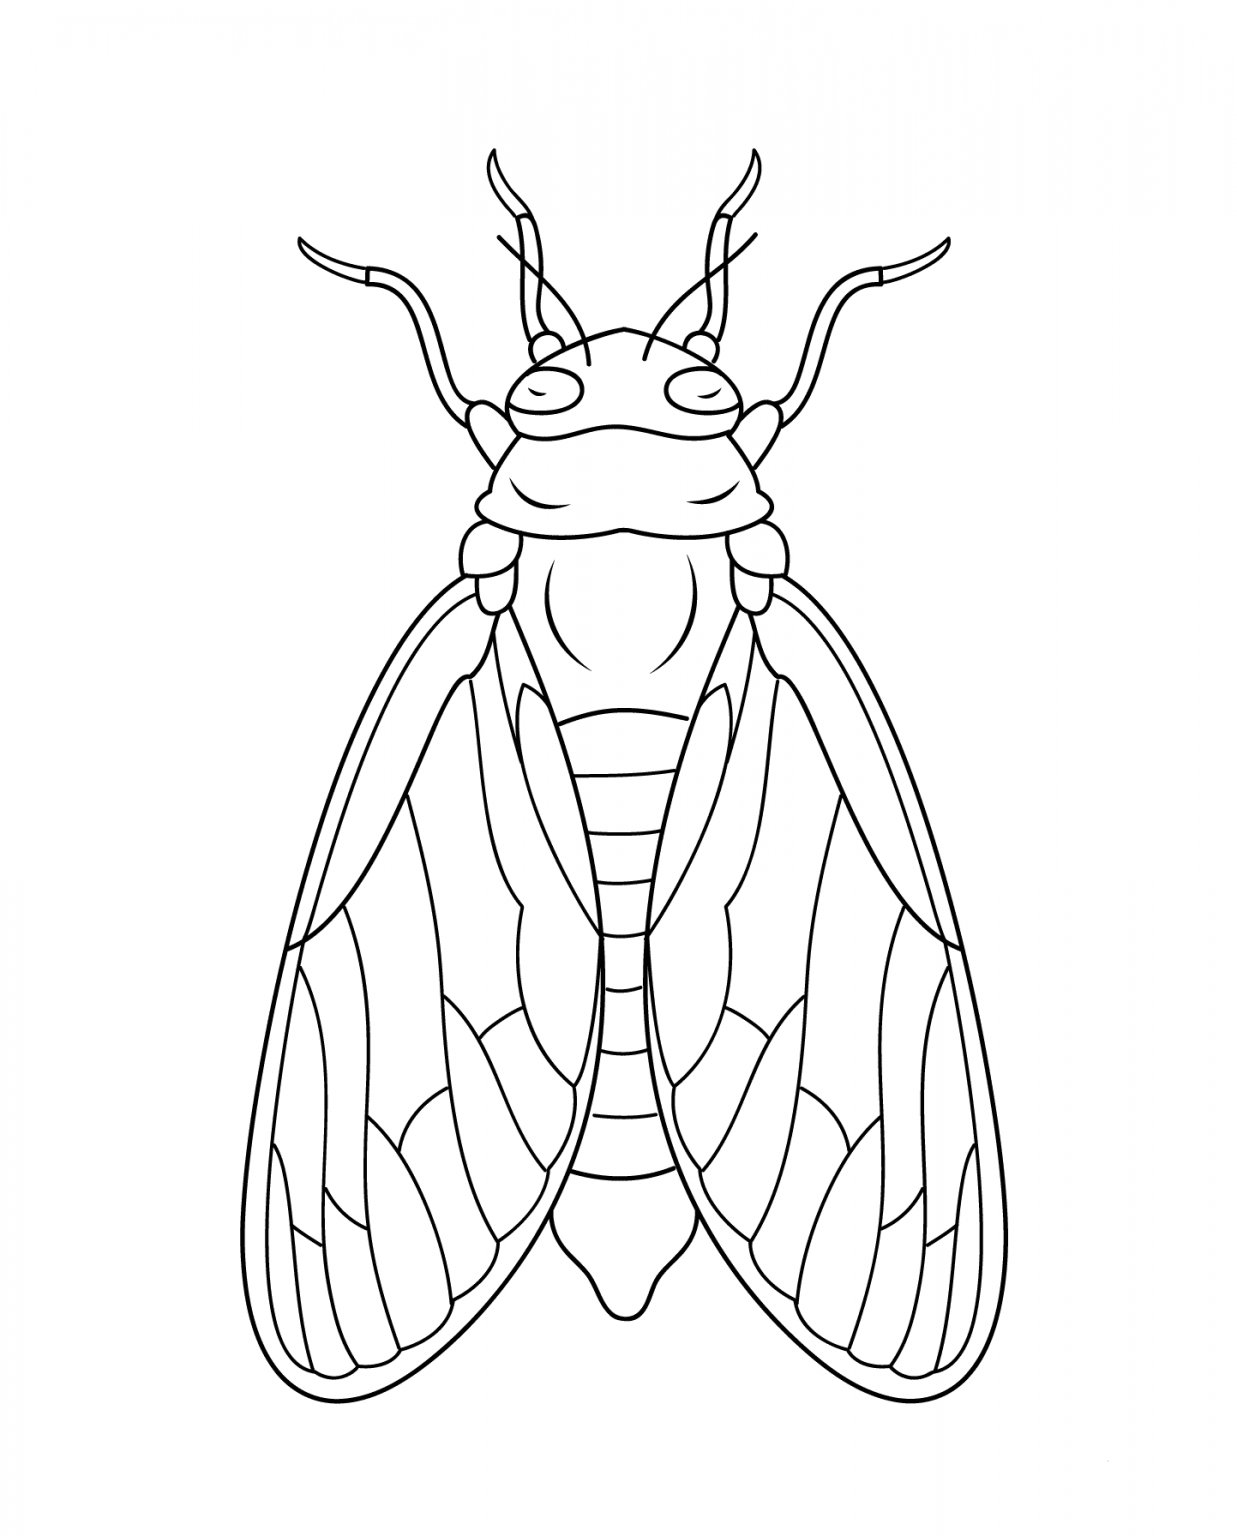 Cicada coloring page ColouringPages